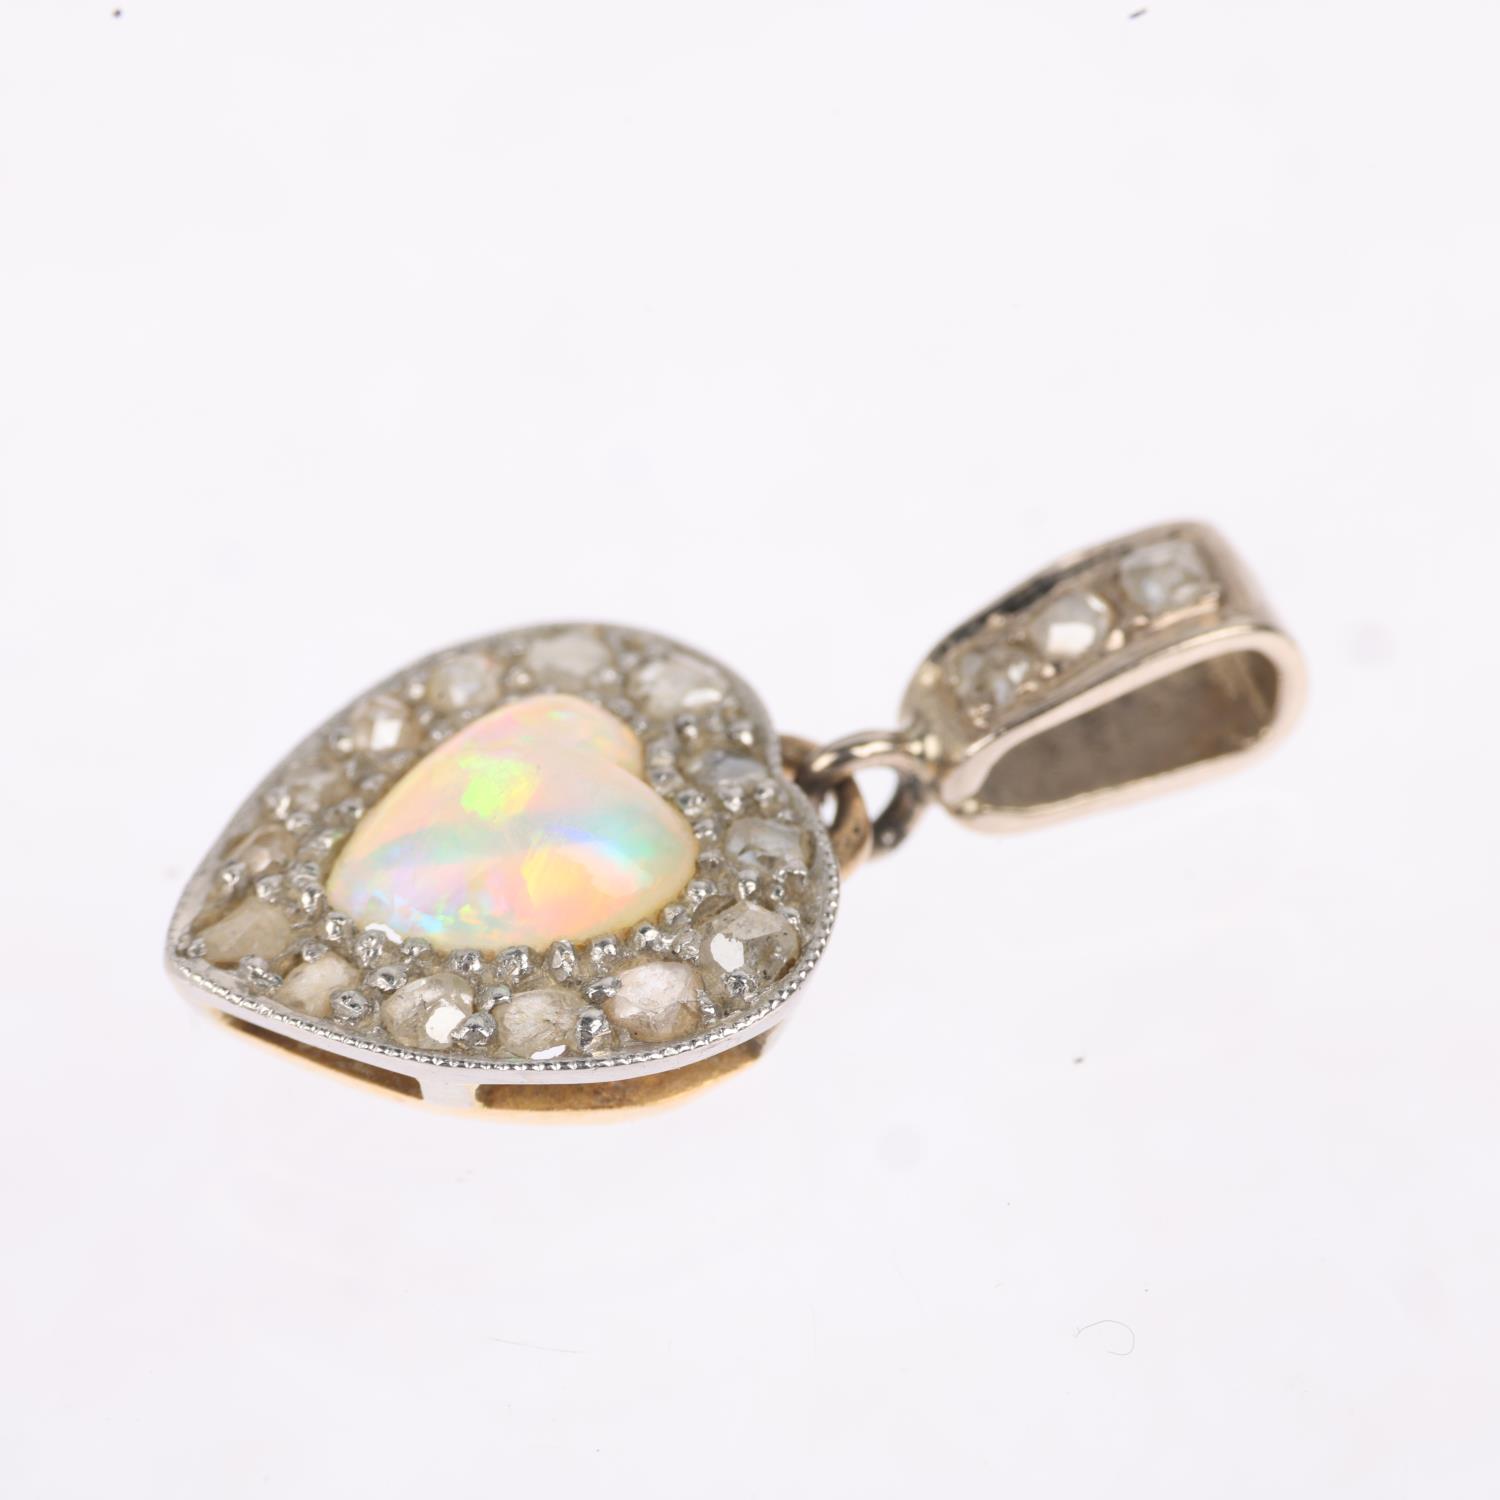 An early 20th century opal and diamond heart cluster drop pendant, circa 1910, centrally set with - Image 3 of 4